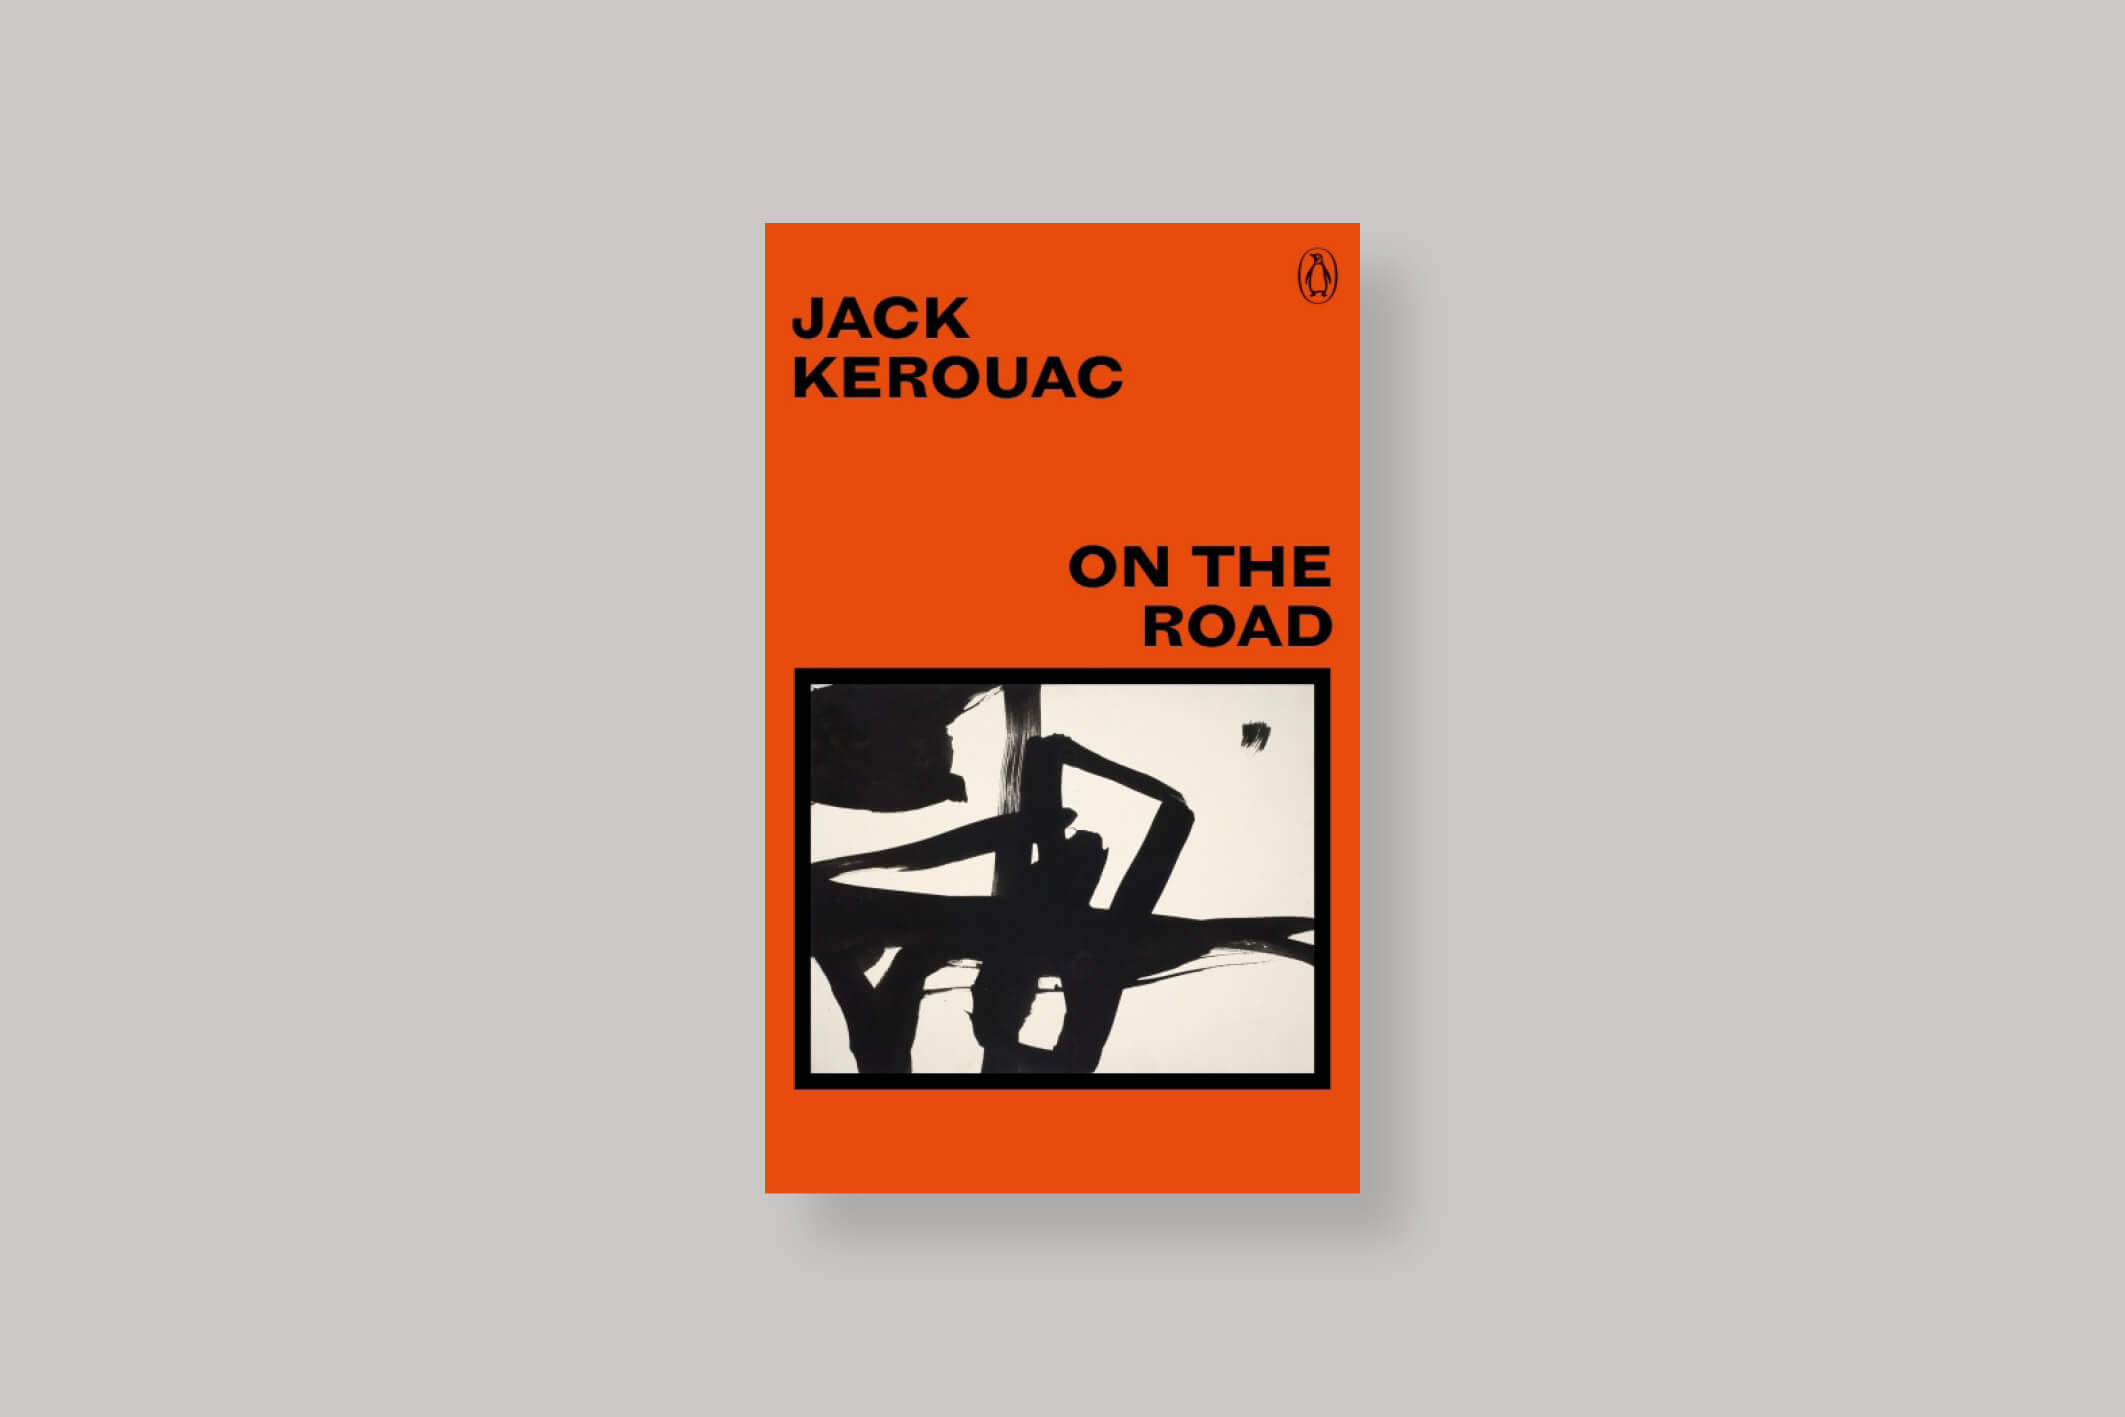 On-the-road-jacl-kerouac-penguin-books-cover